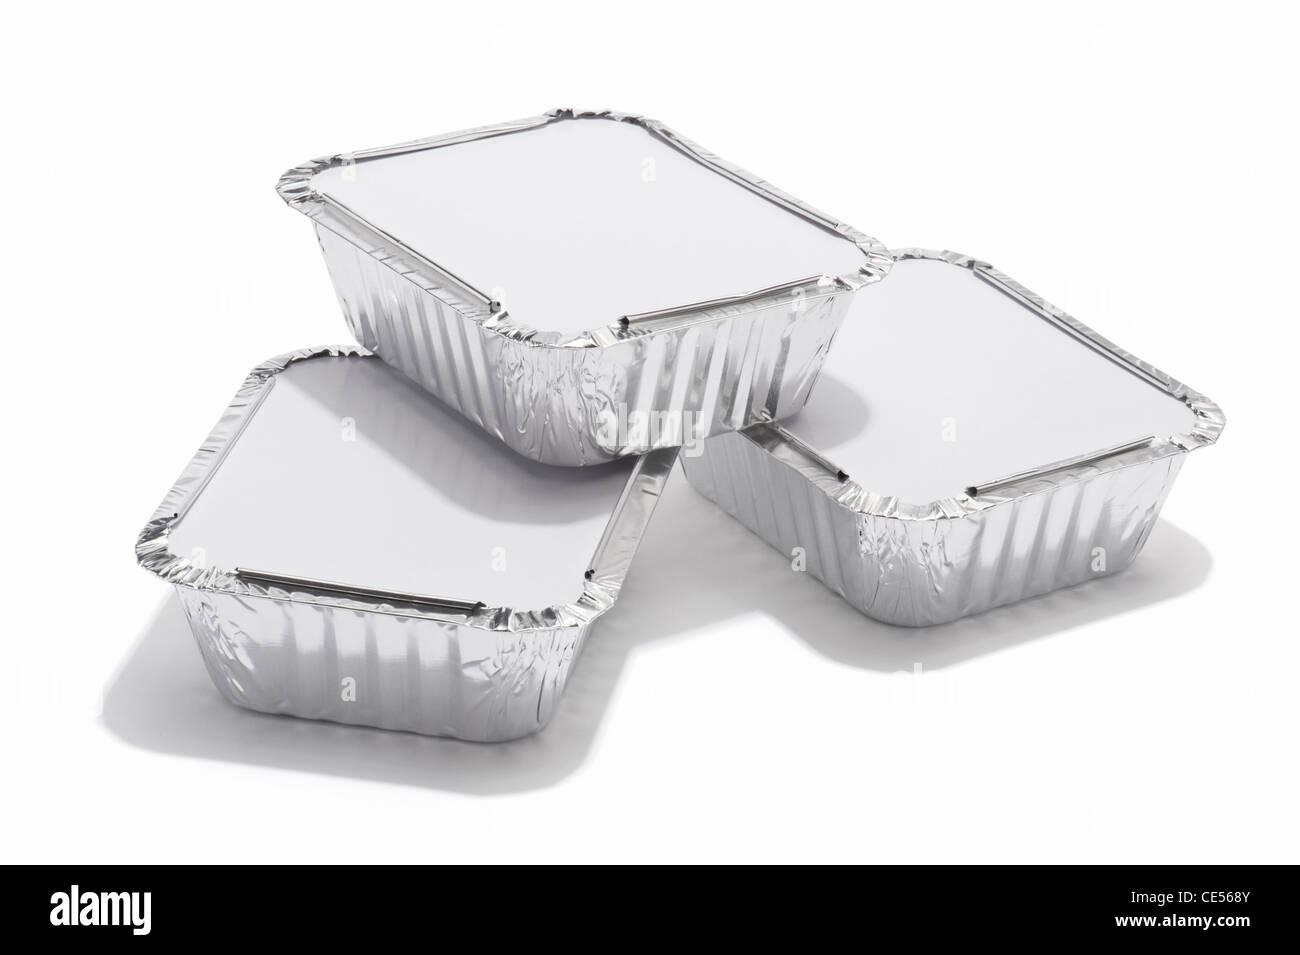 https://c8.alamy.com/comp/CE568Y/three-foil-food-containers-CE568Y.jpg